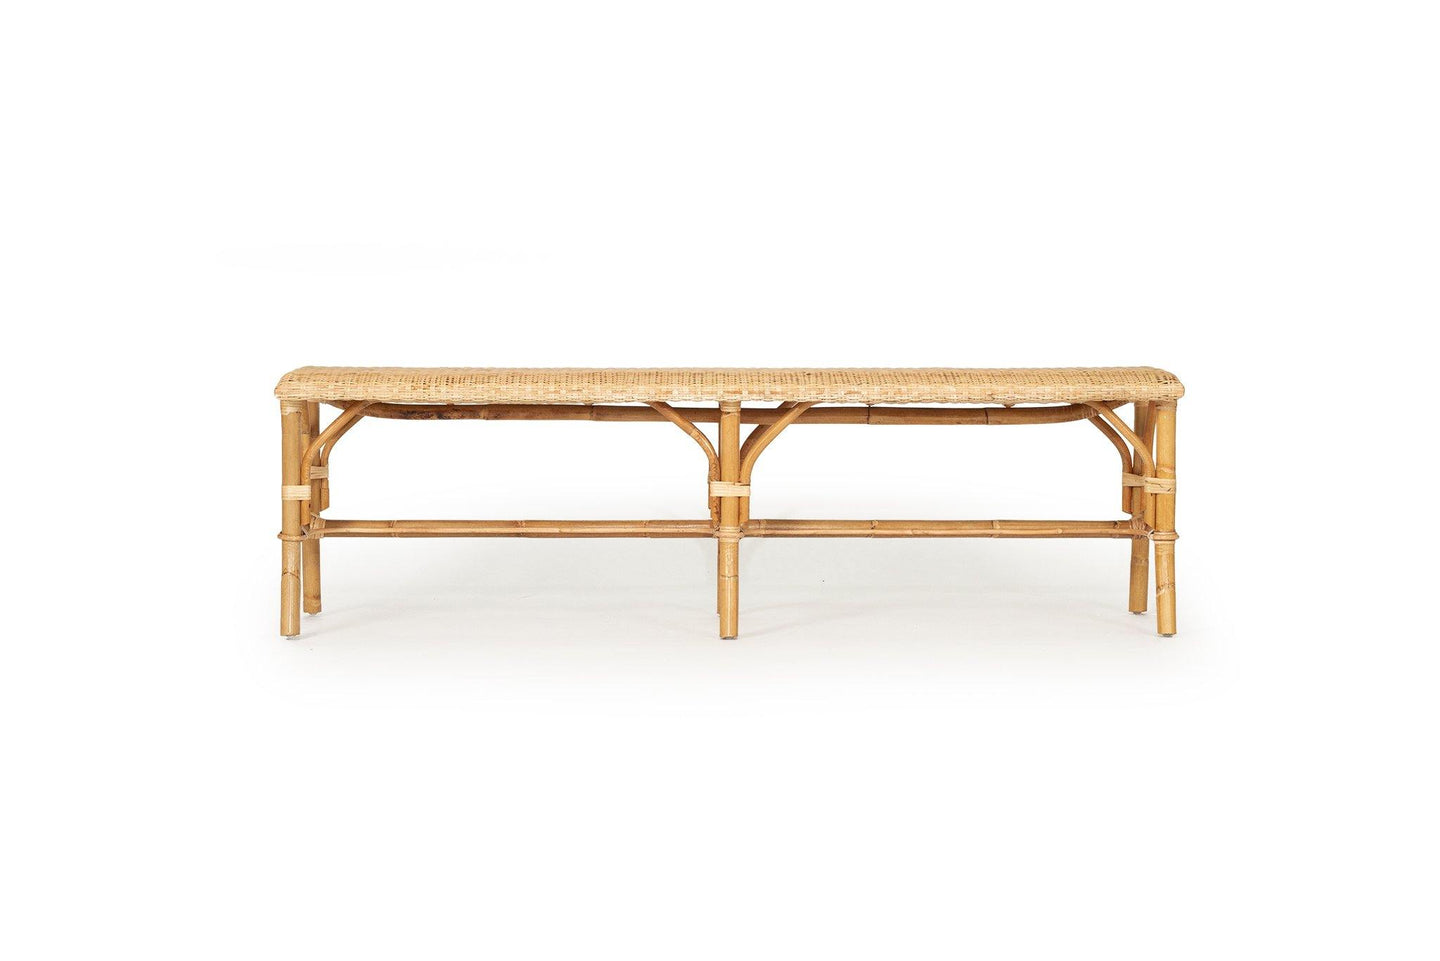 Lounge Styles Abide Interiors Sorrento Backless Rattan Frame and Seat Bench – Natural